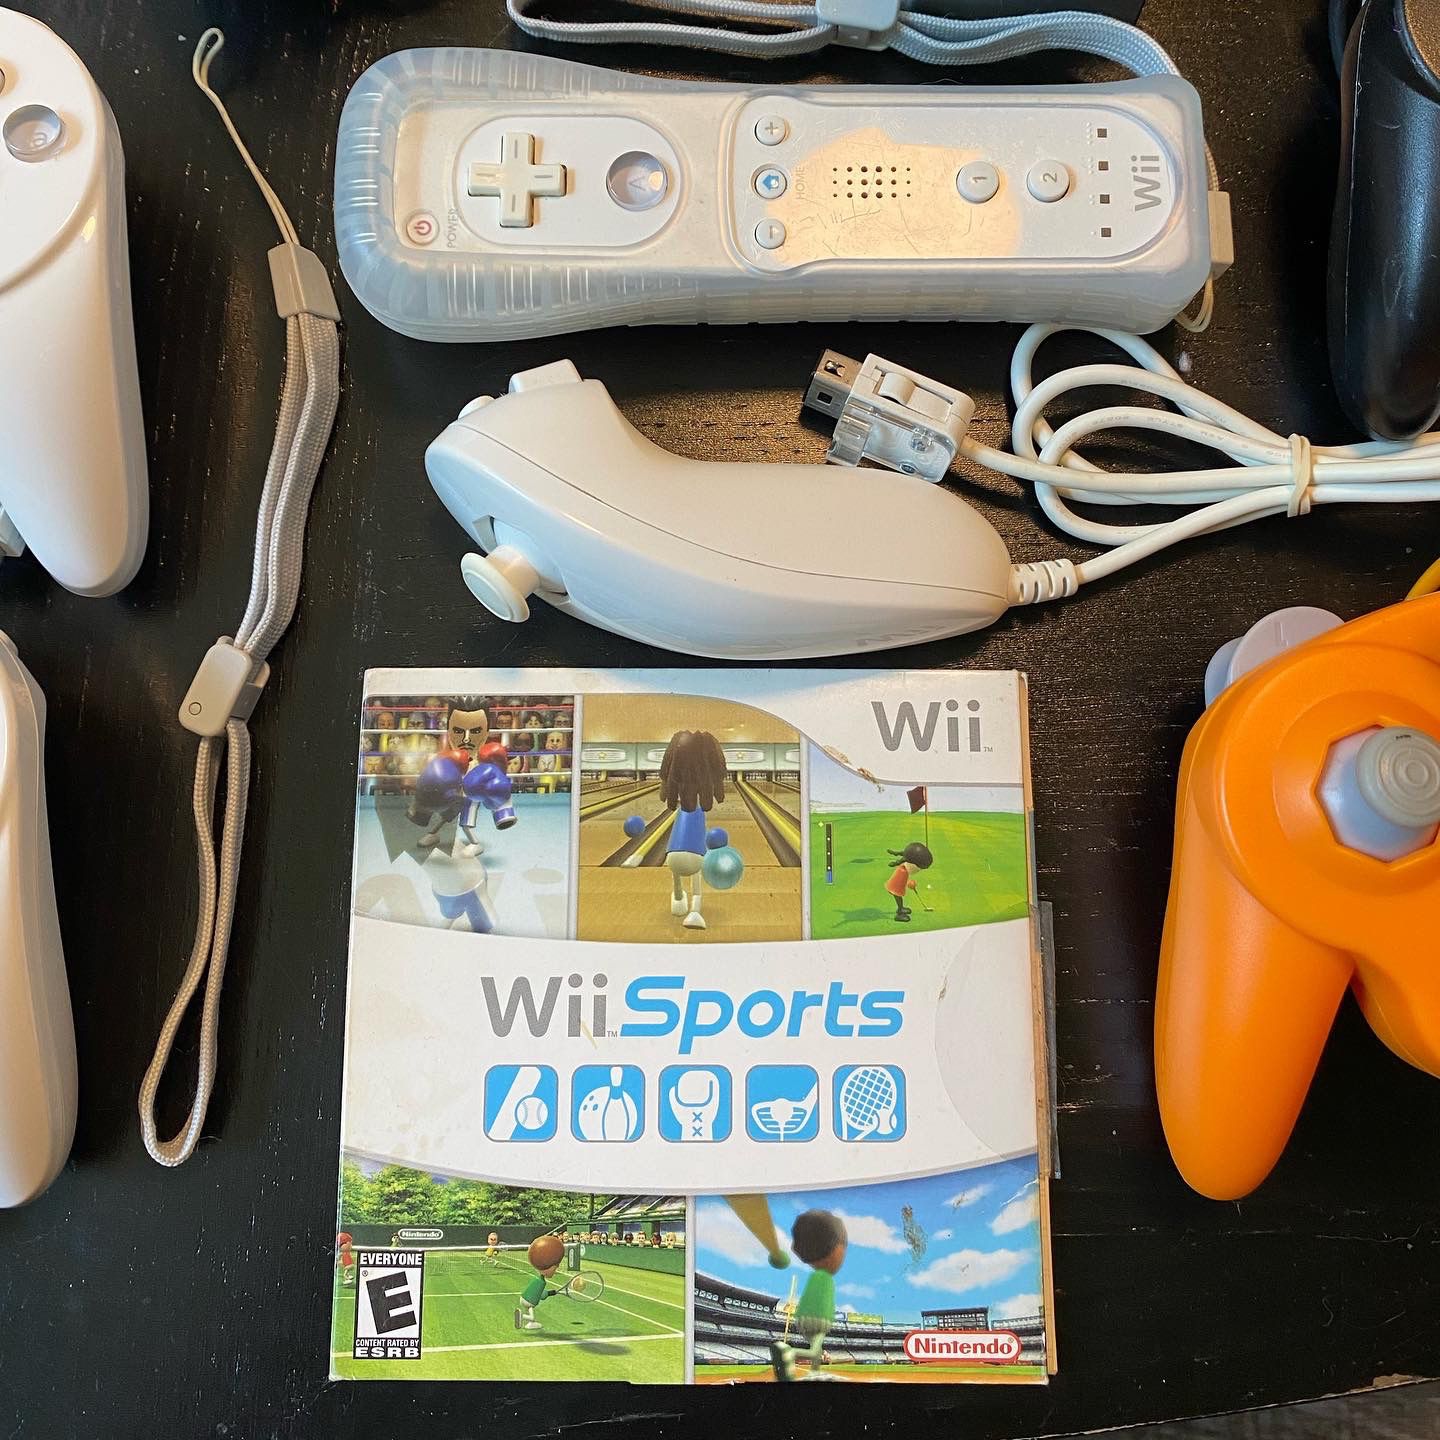 Nintendo Wii Console Bundle RVL-001 GameCube Compatible w/ Wii Sports Video Game